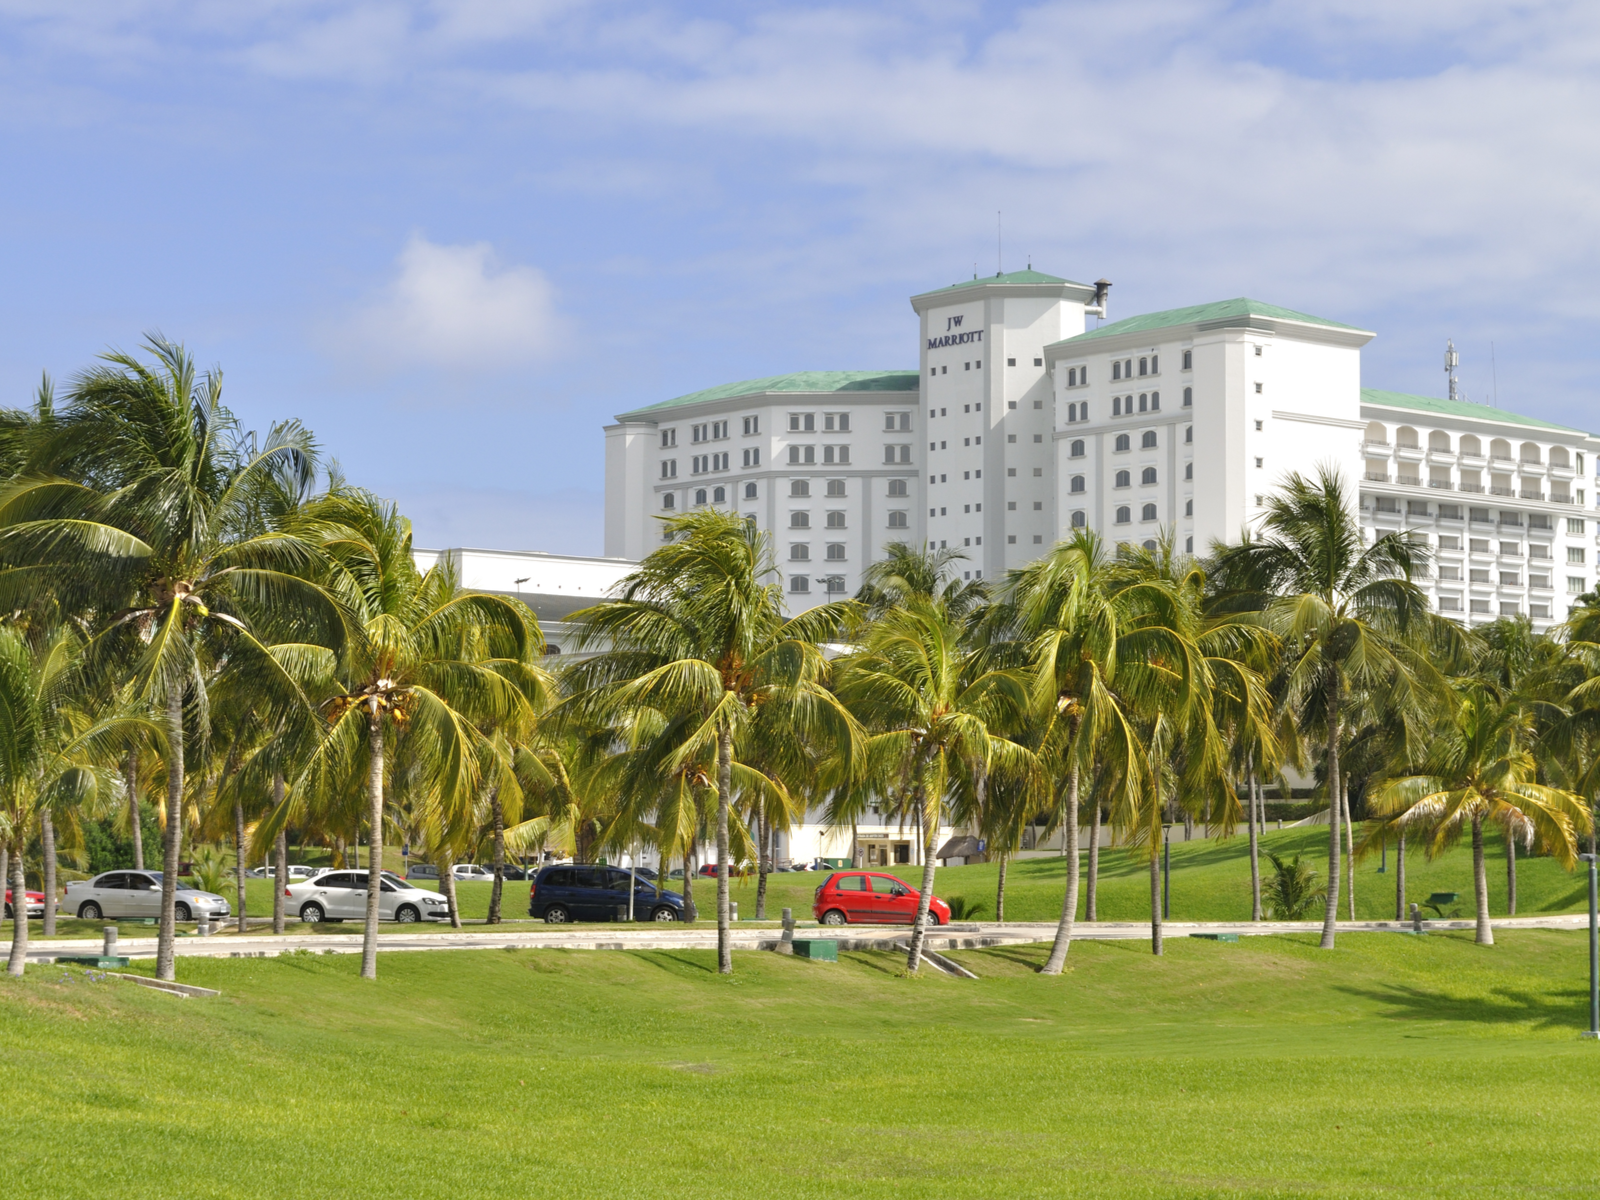 Cars driving by a small road alongside palm trees grown on green lawn with JW Marriott luxury resort and spa peaking in background, one of the best all-inclusive resorts in Cancun for families